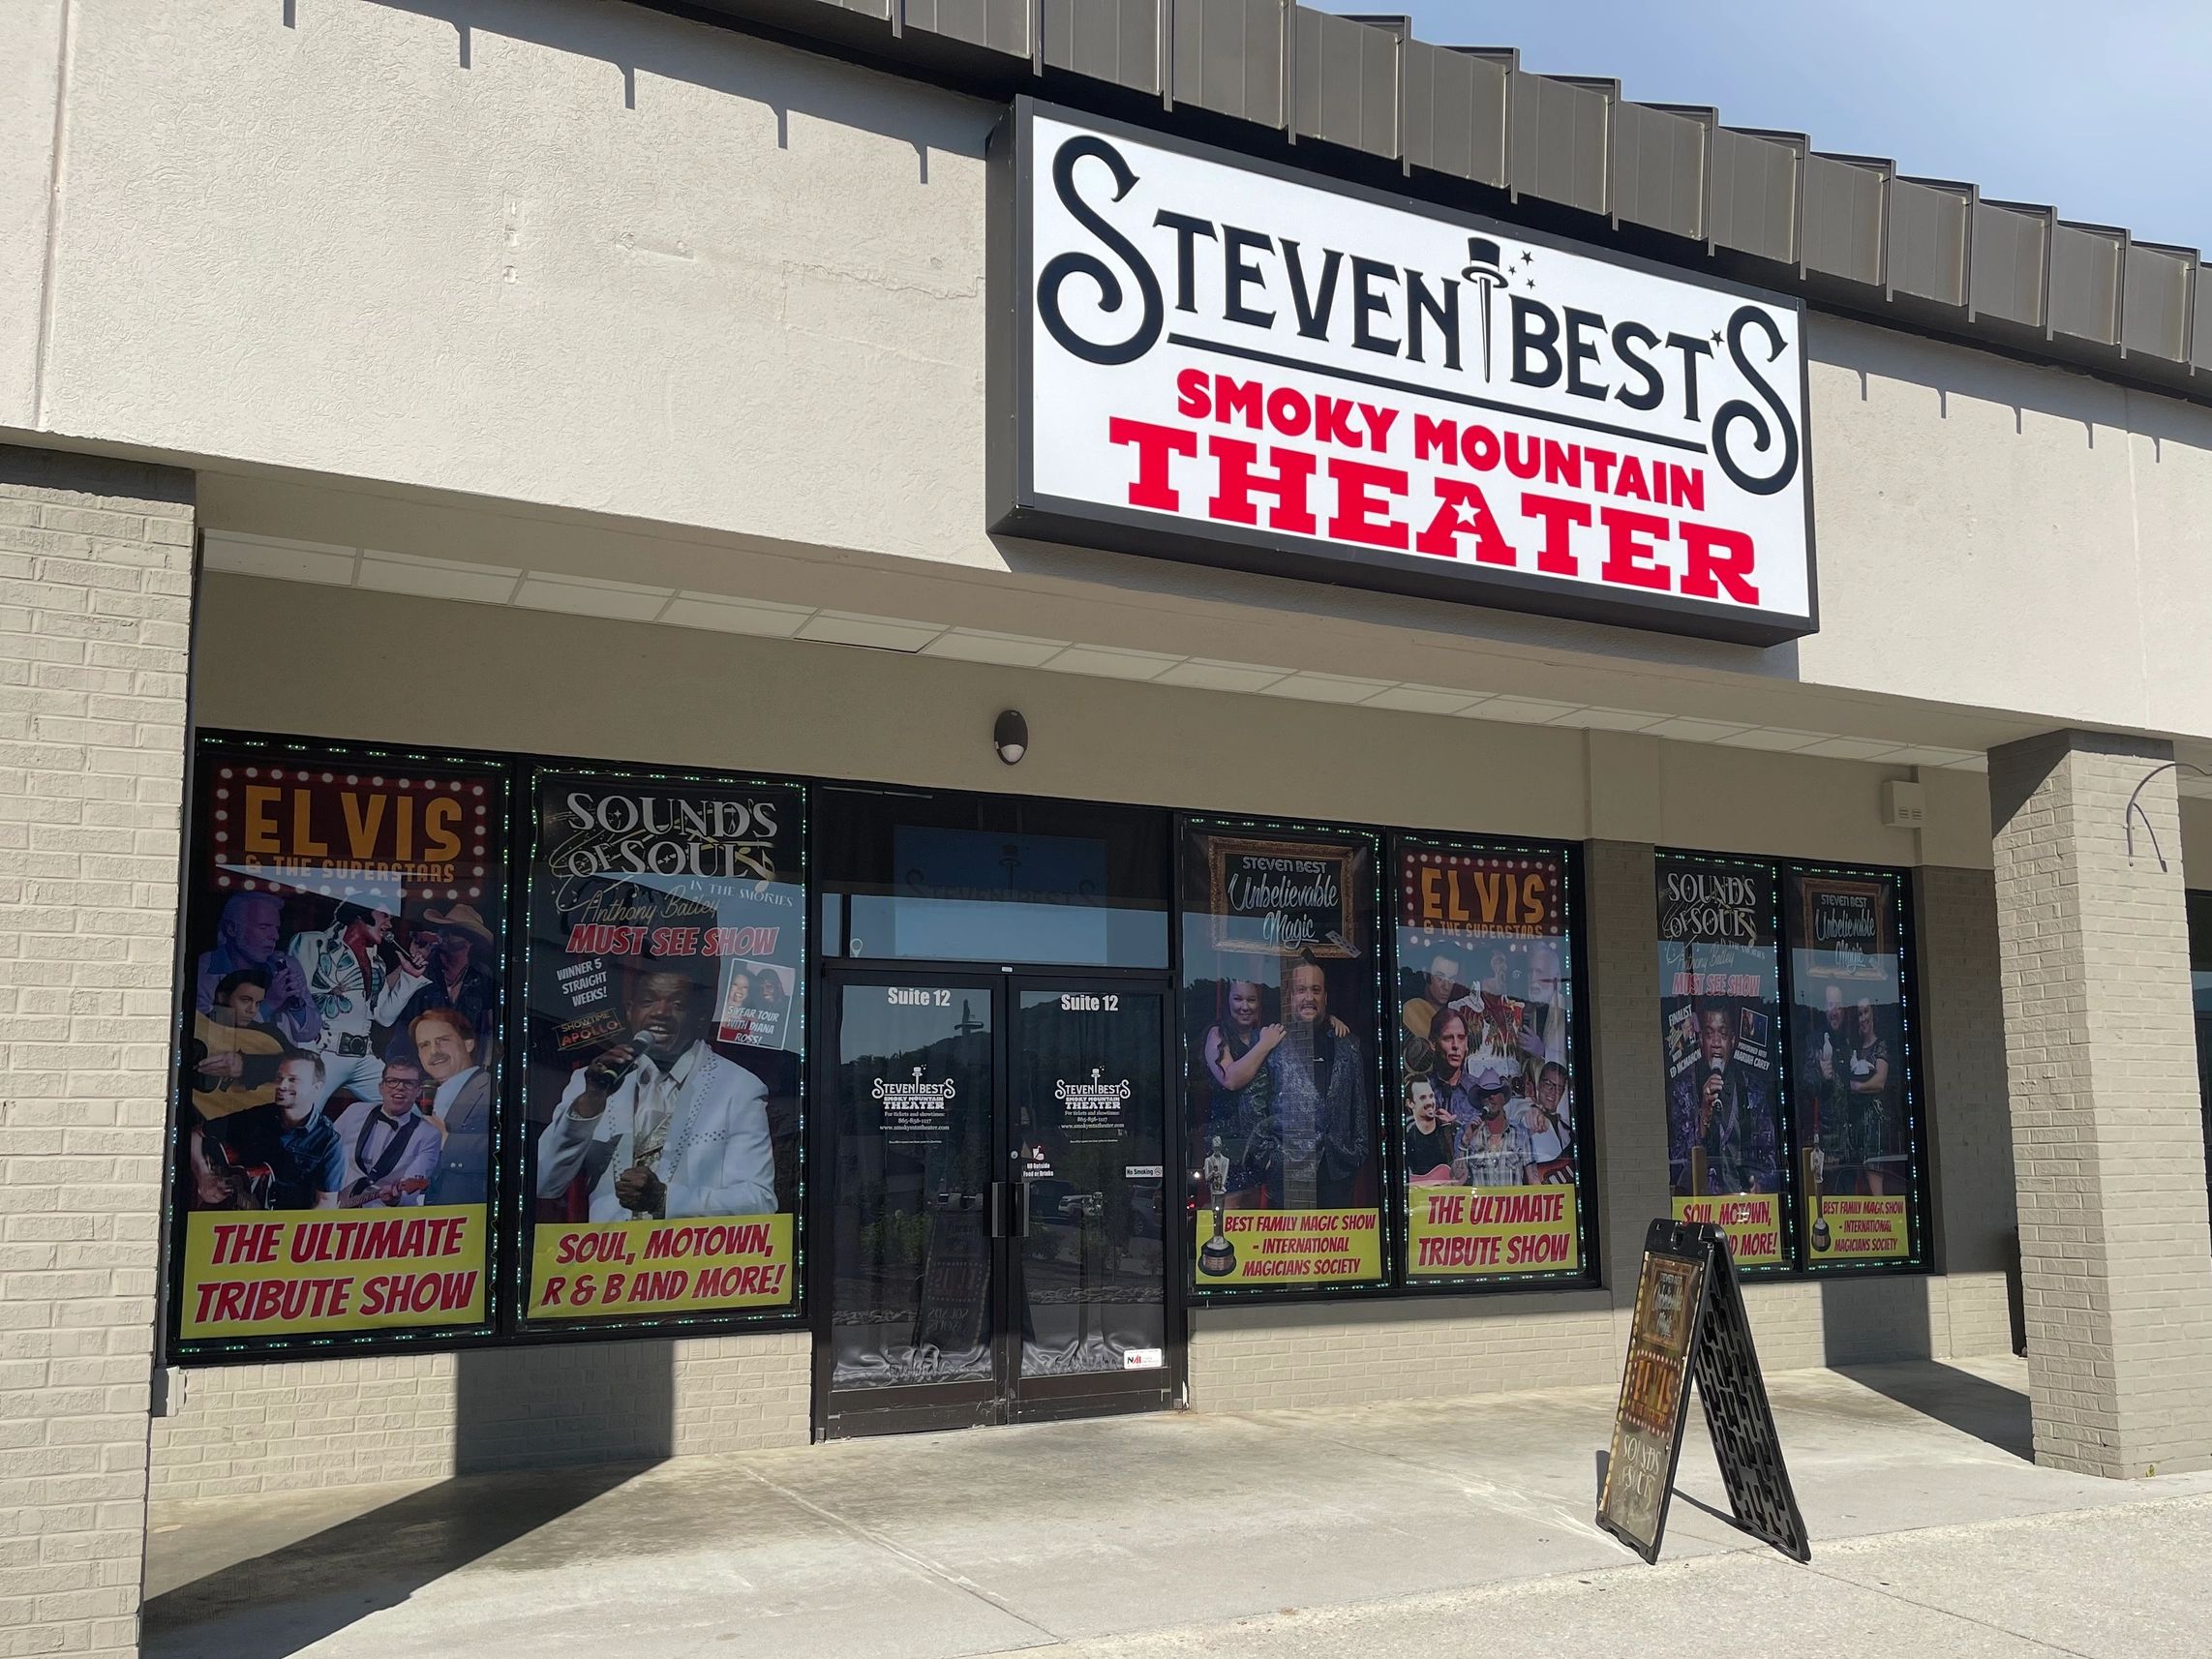 Steven Best’s Smoky Mountain Theater home to three pigeon forge shows 